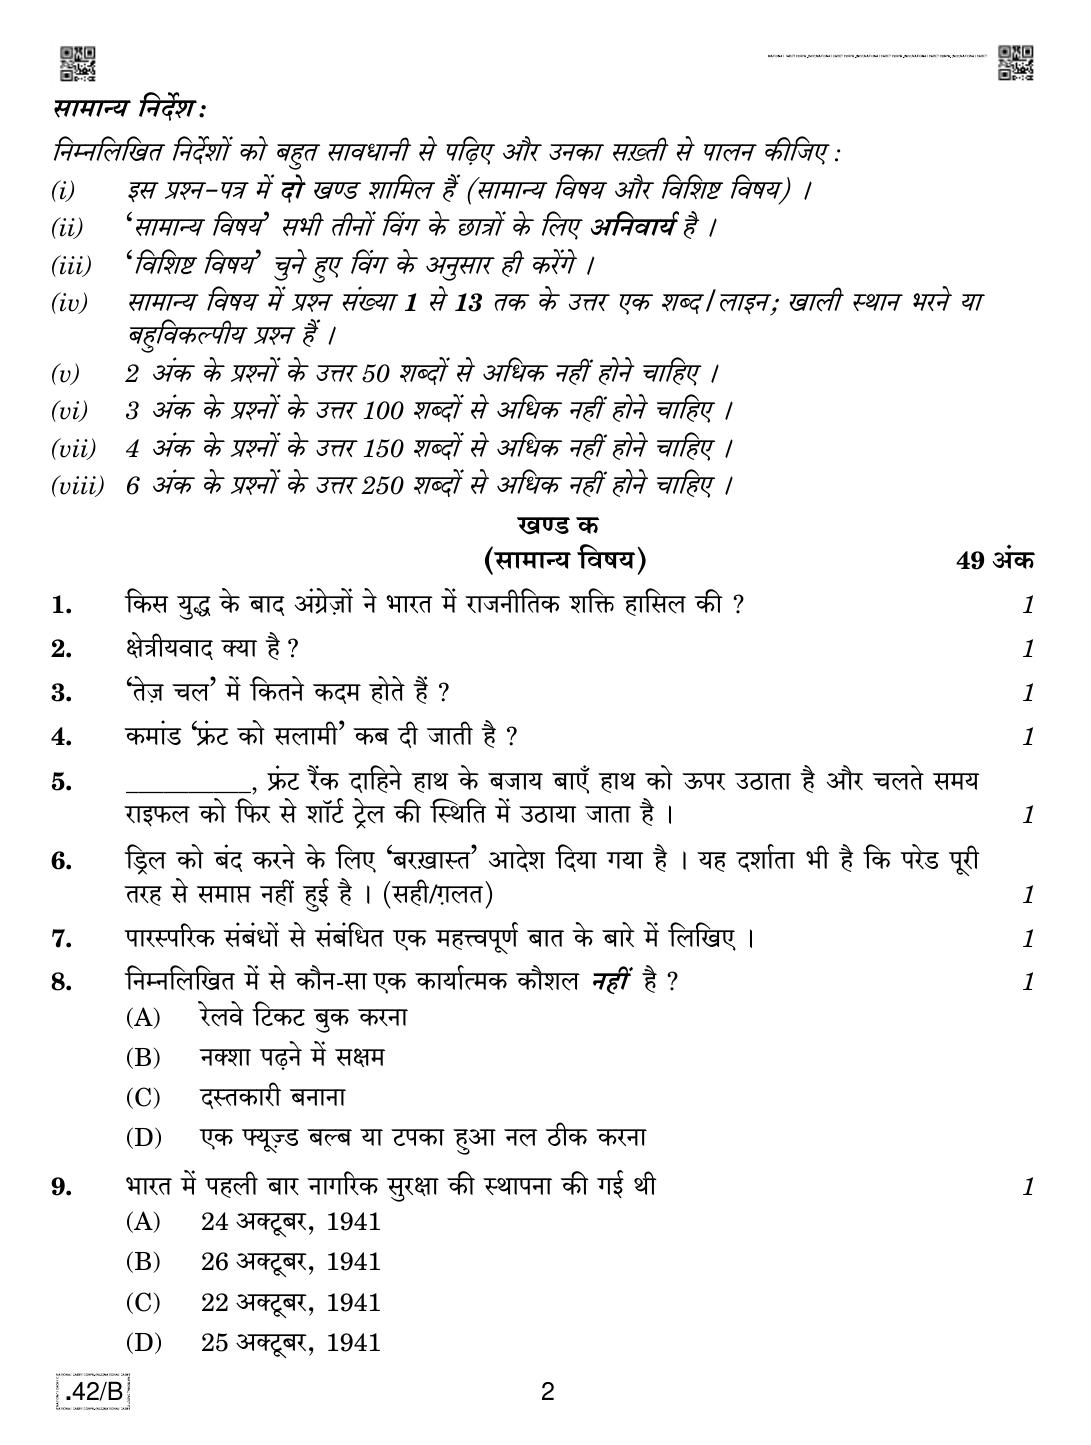 CBSE Class 12 NCC 2020 Compartment Question Paper - Page 2